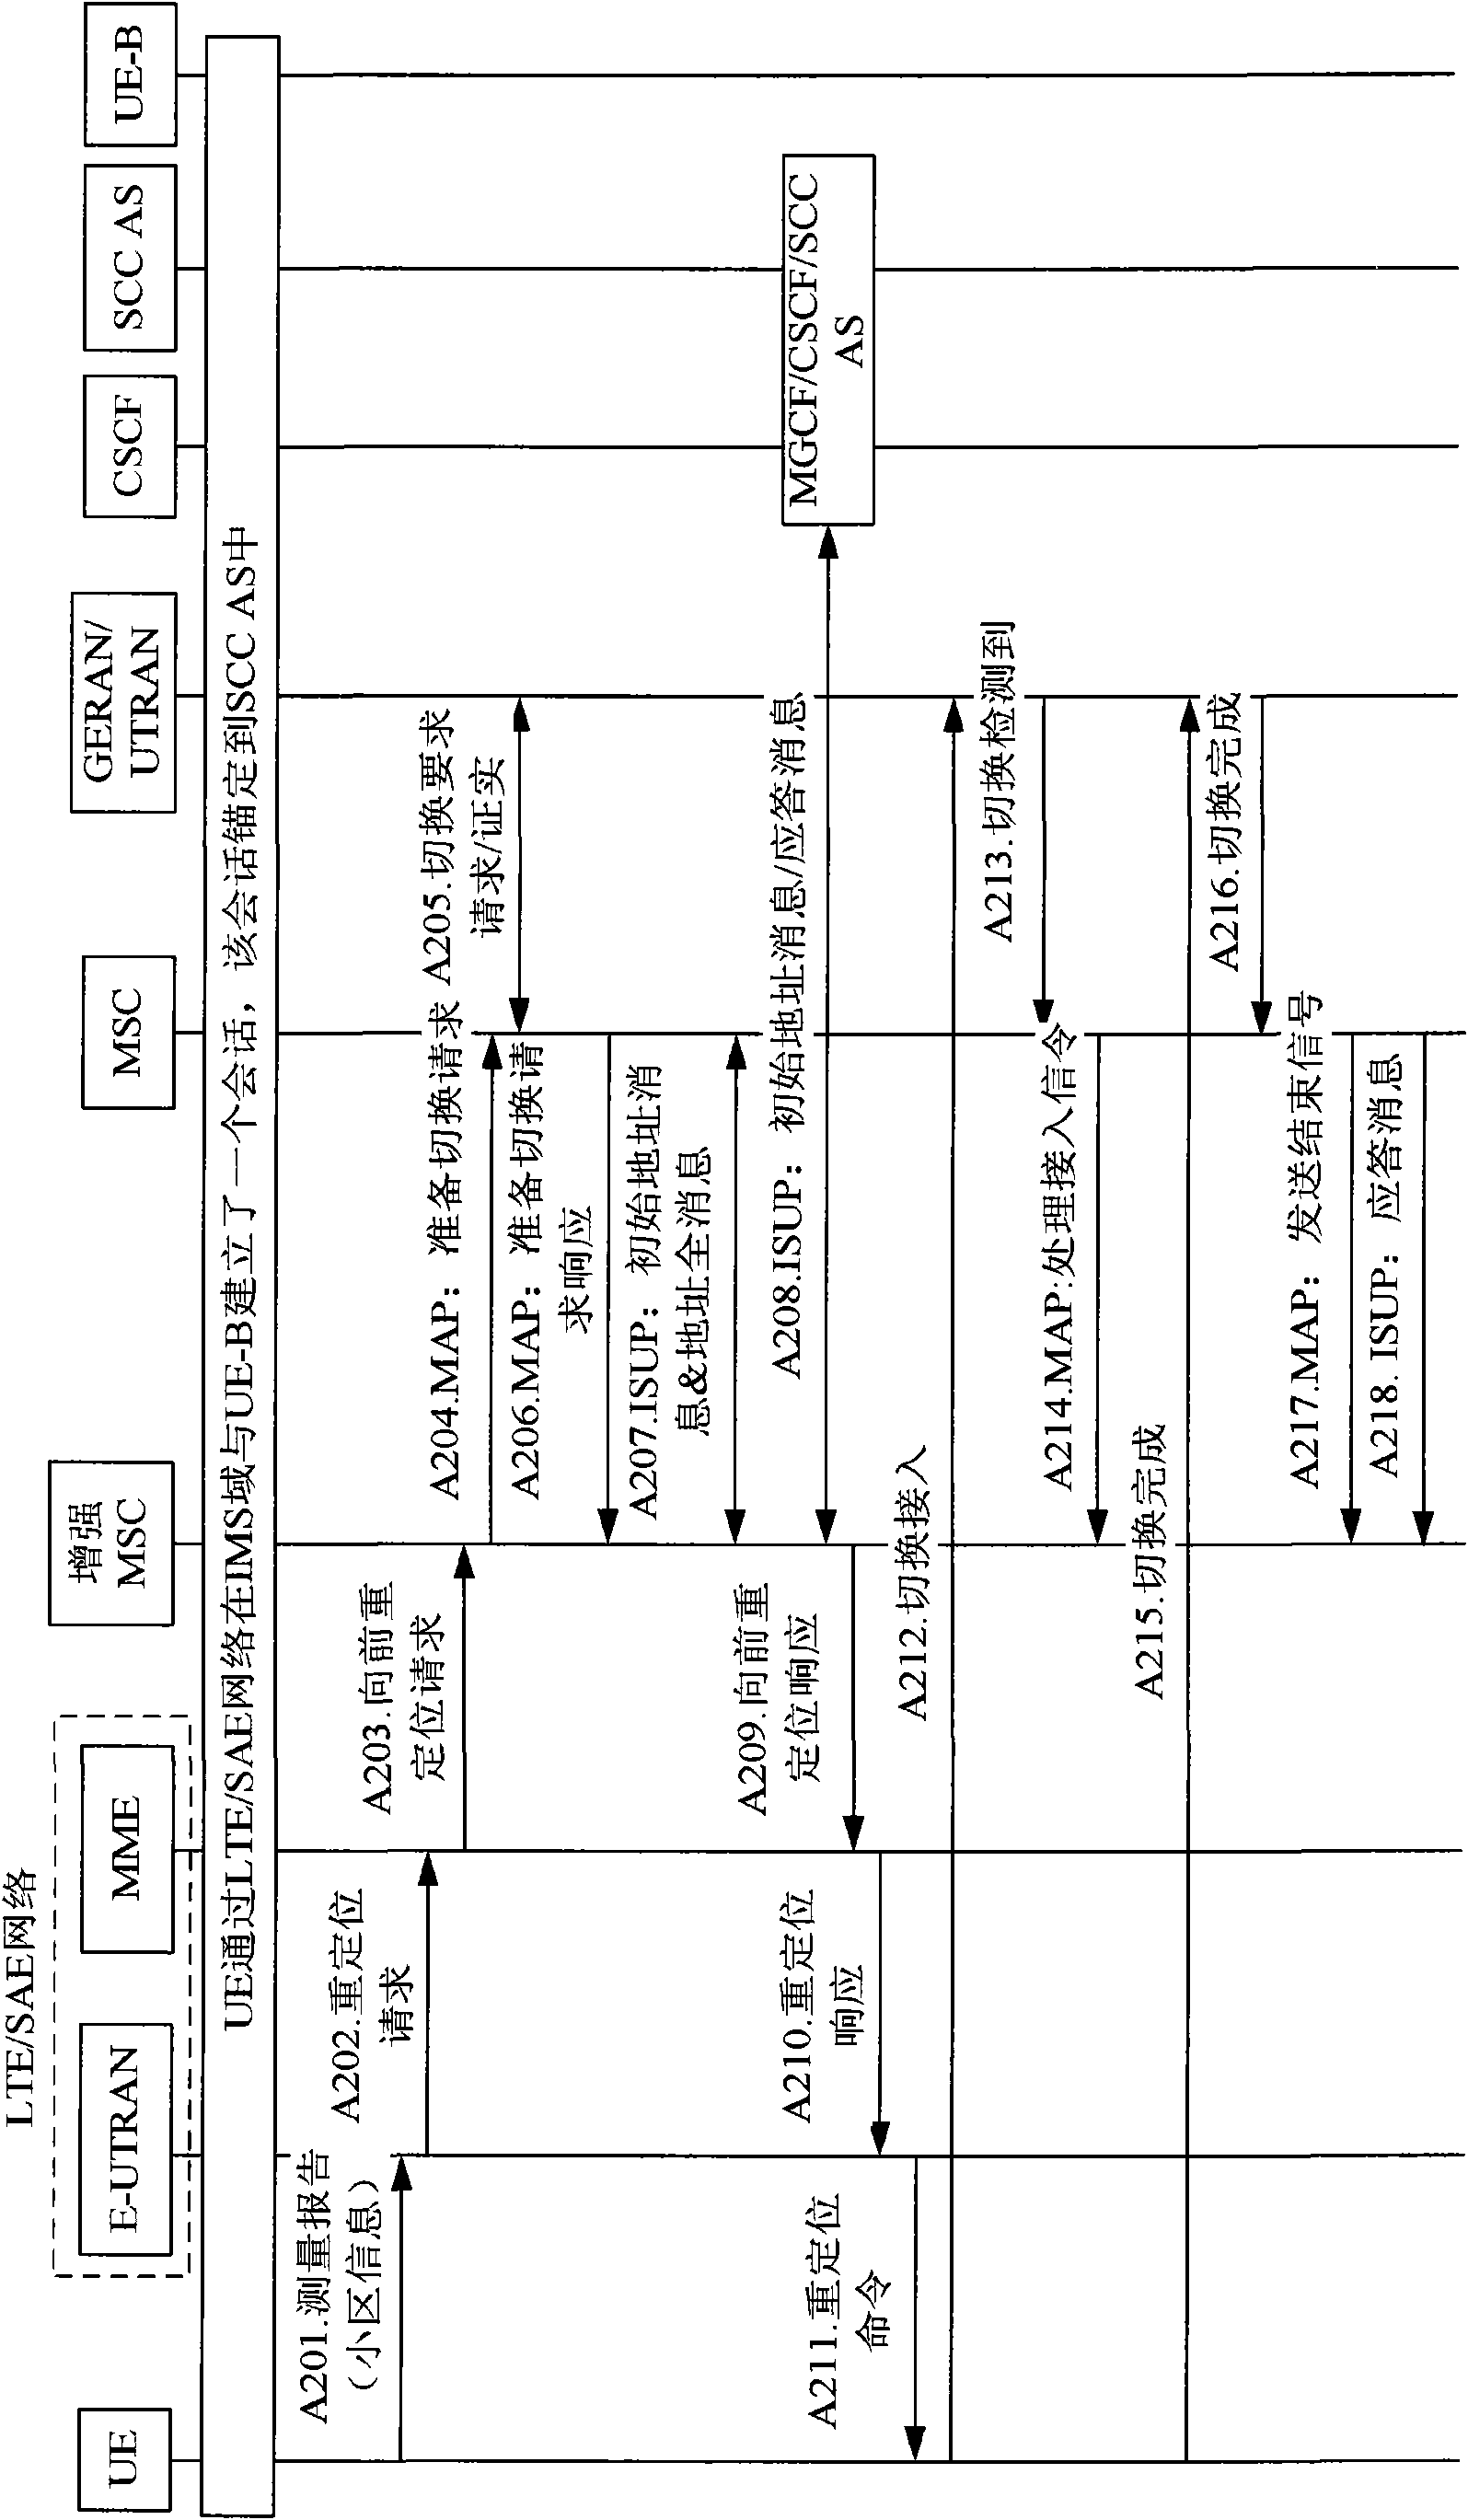 Method for transferring emergency service sessions, and emergency service system